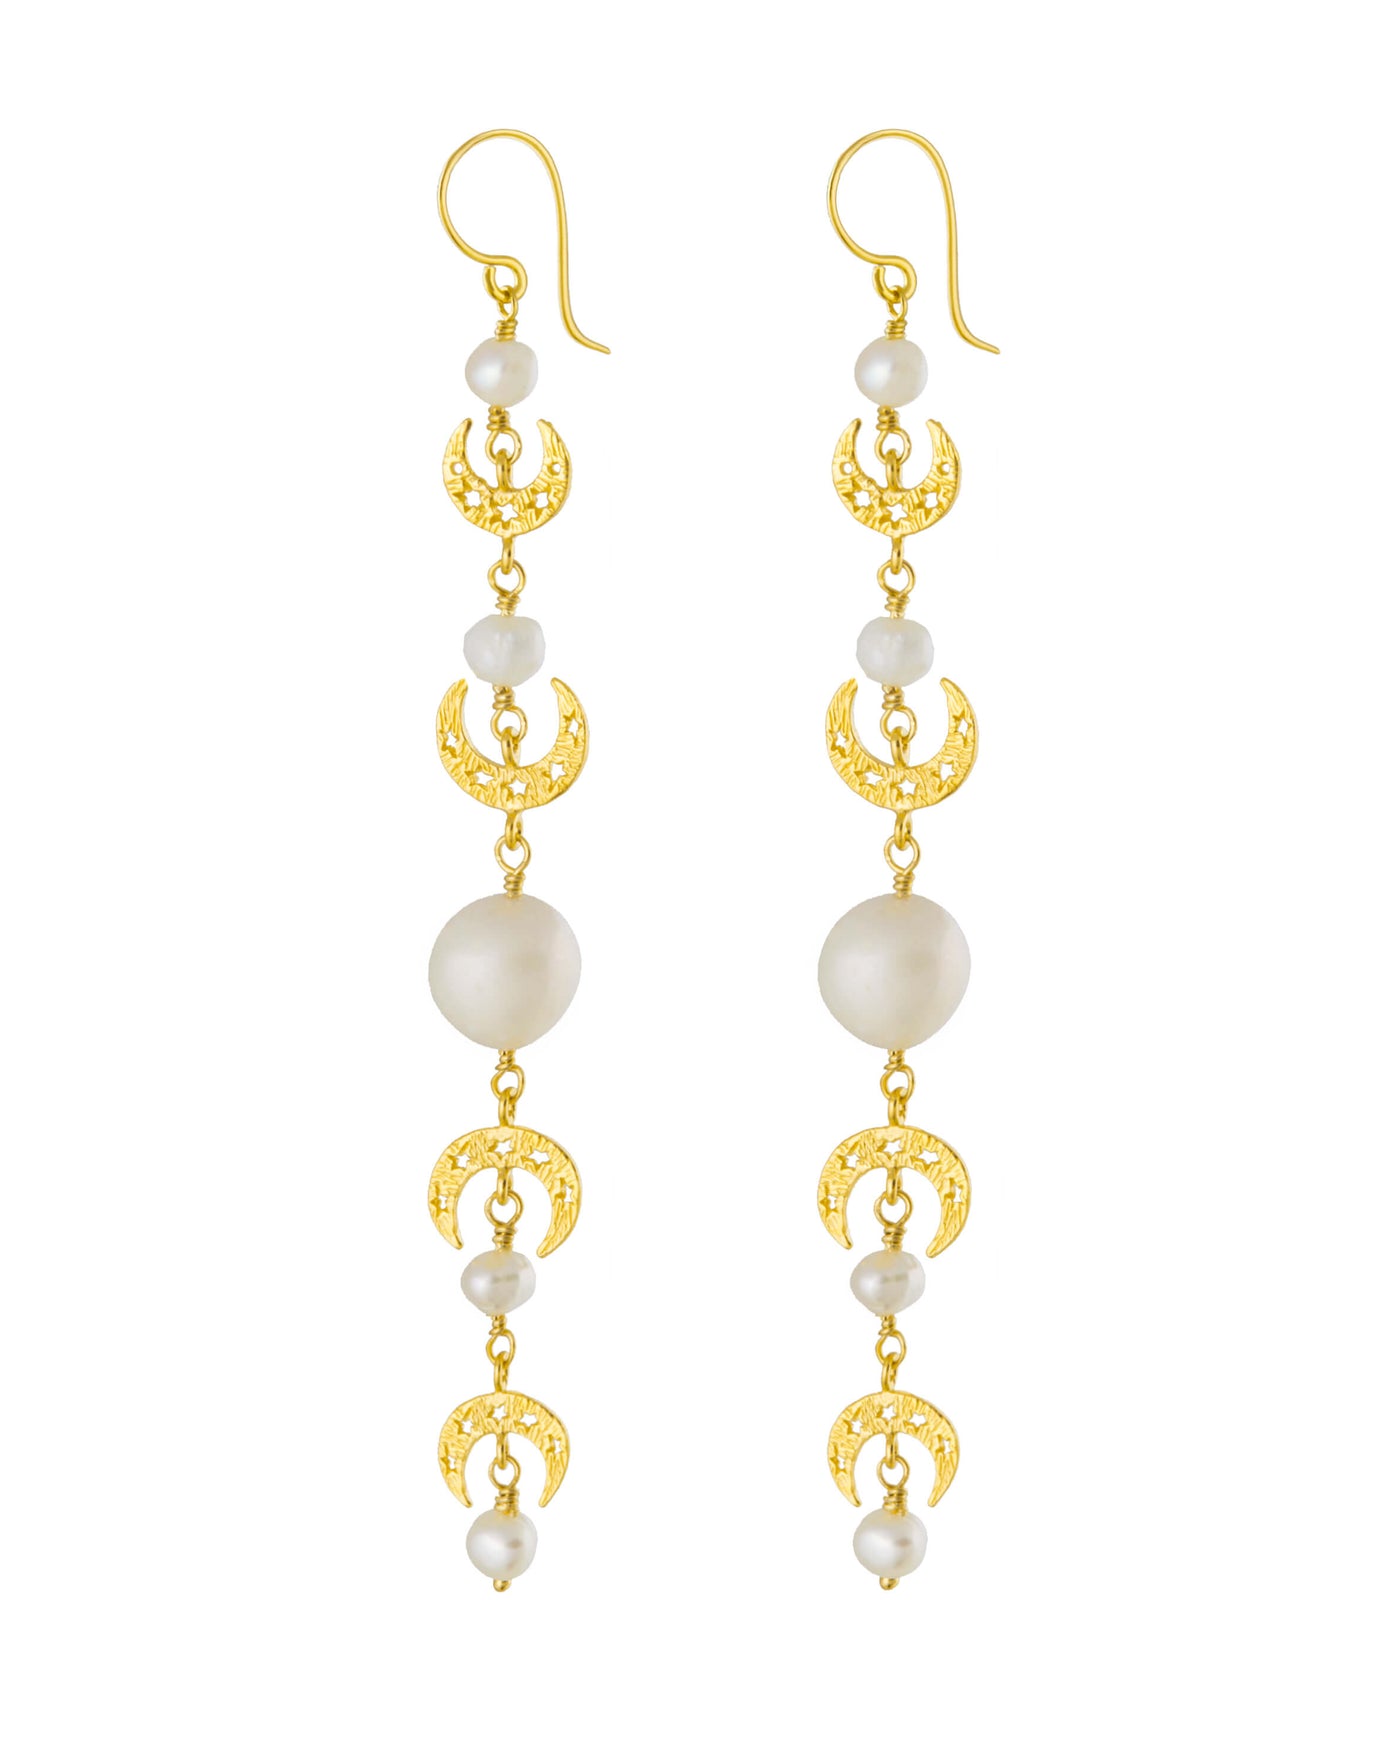 Moon cycle pearl earrings. Silver, gold-plated